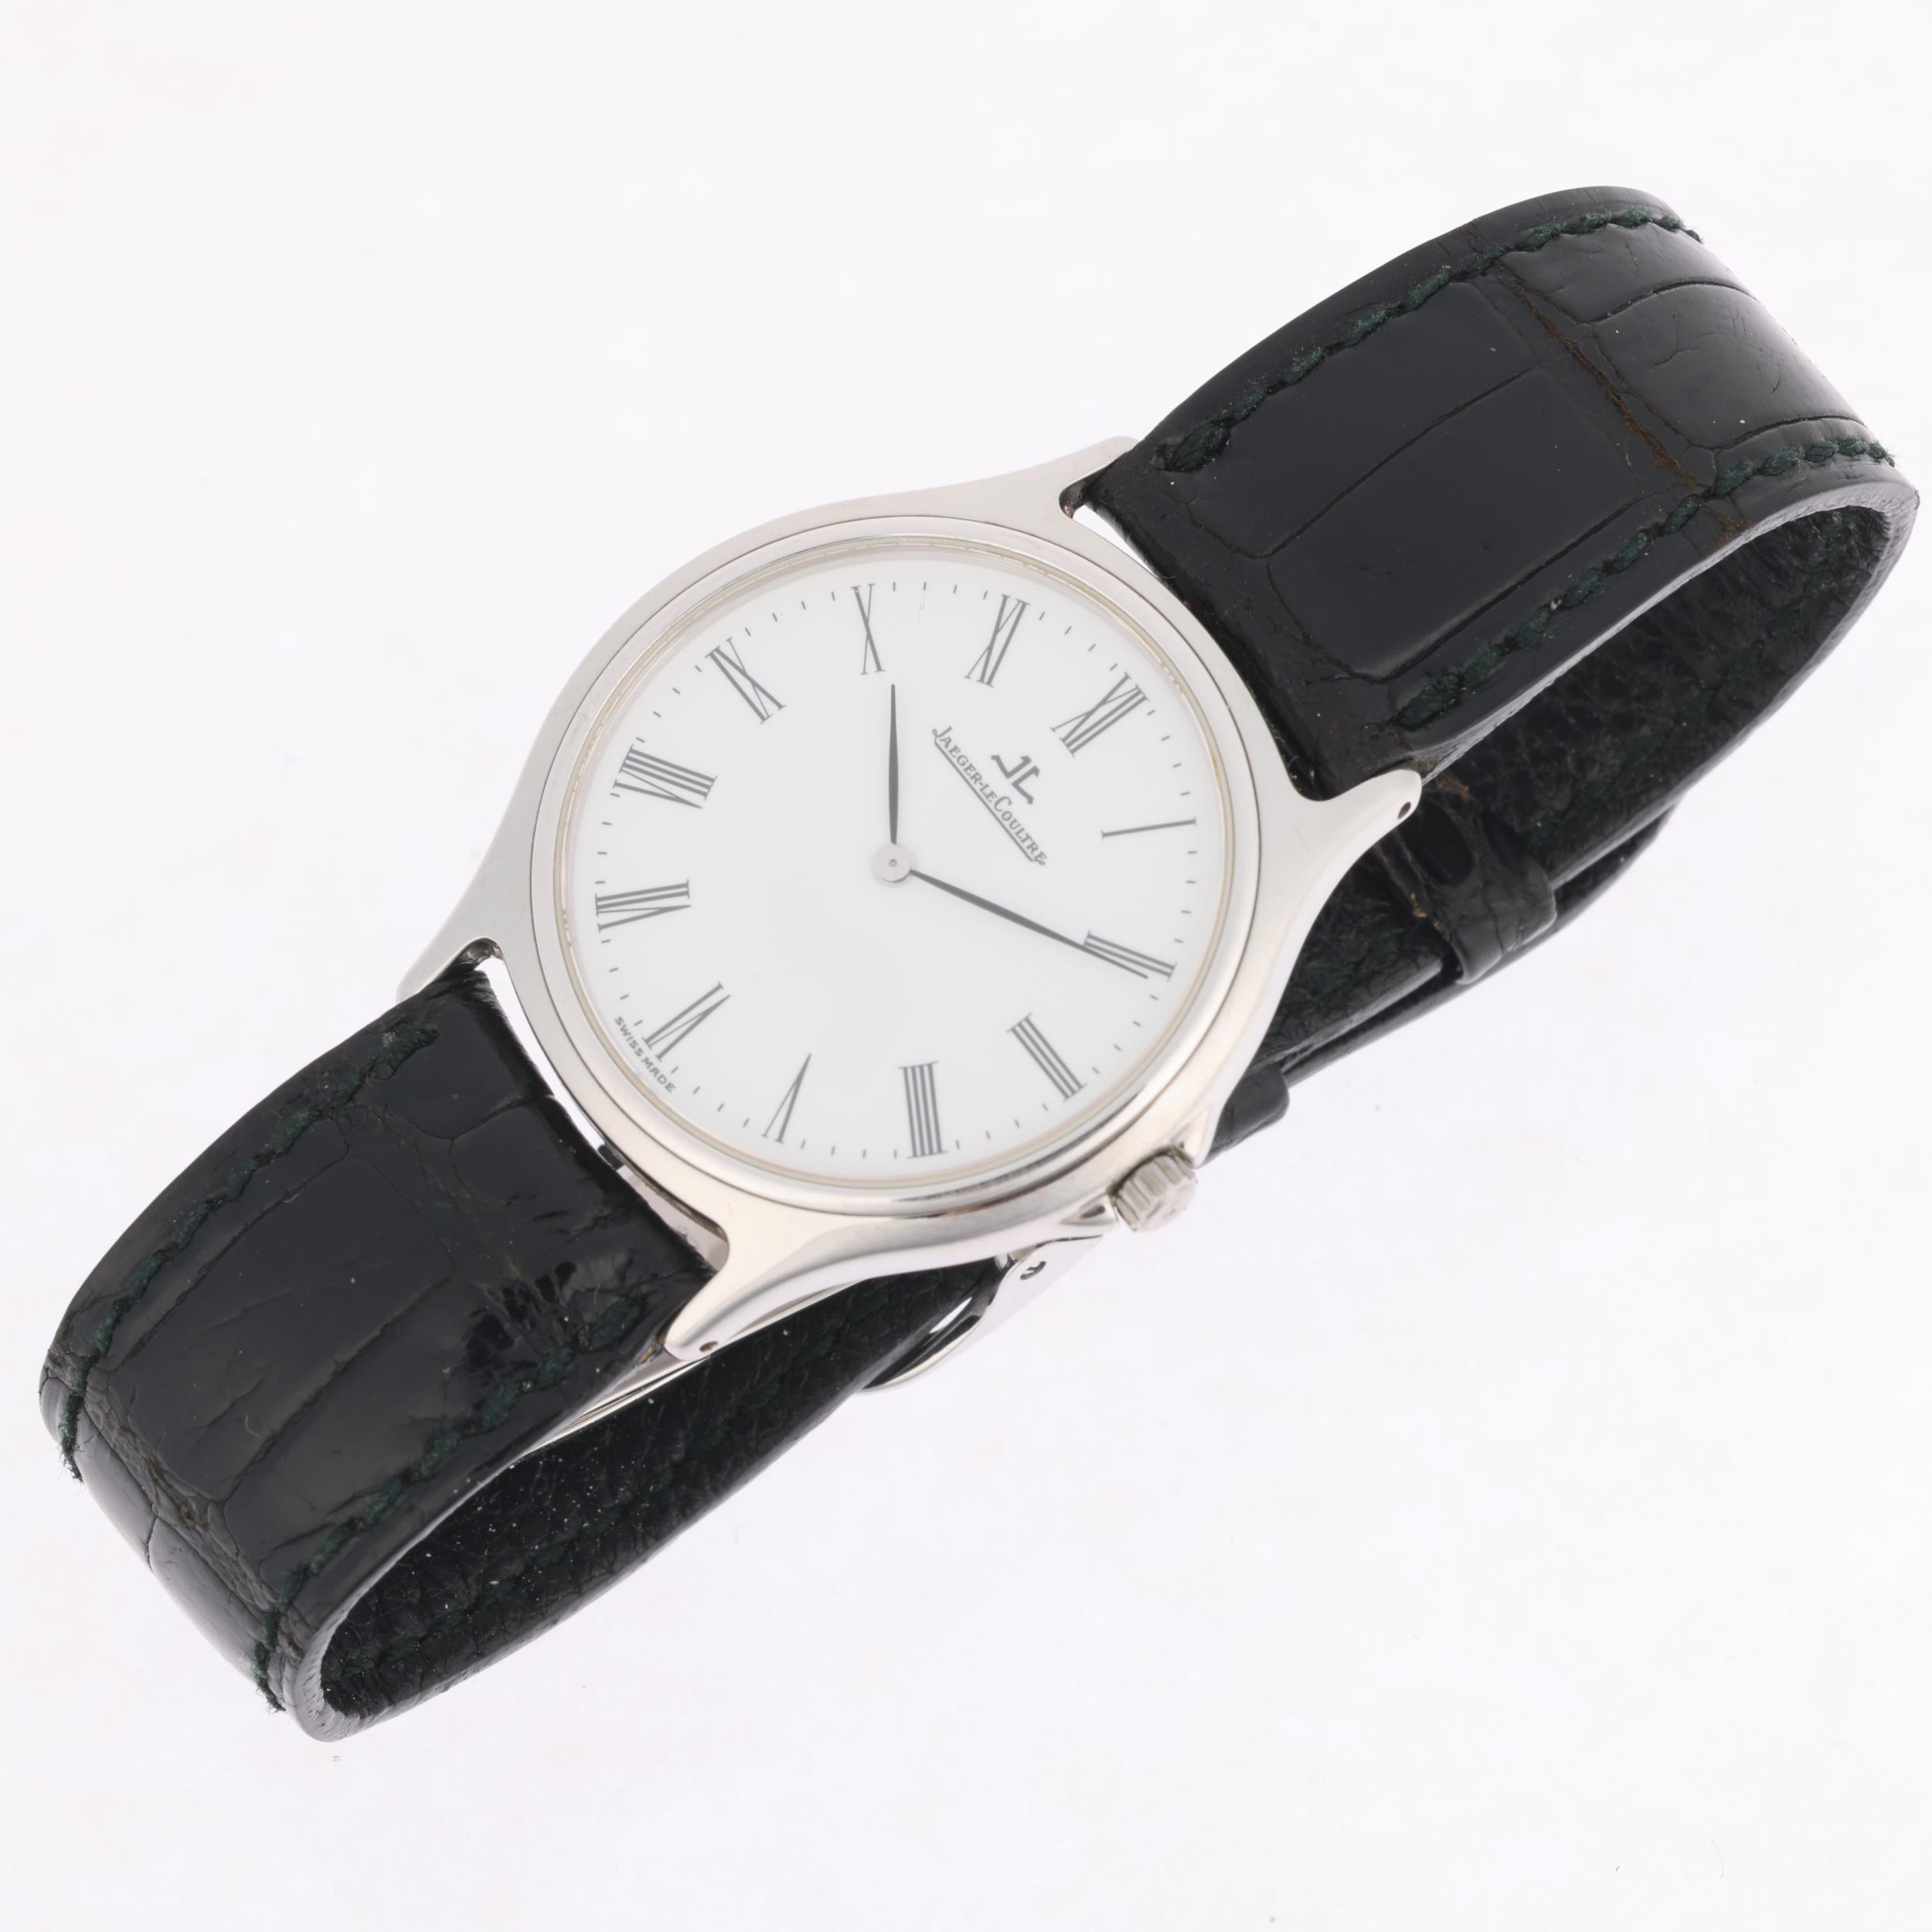 JAEGER LECOULTRE - a stainless steel Heraion quartz wristwatch, ref. 112.8.08, circa 1997, white - Image 2 of 5